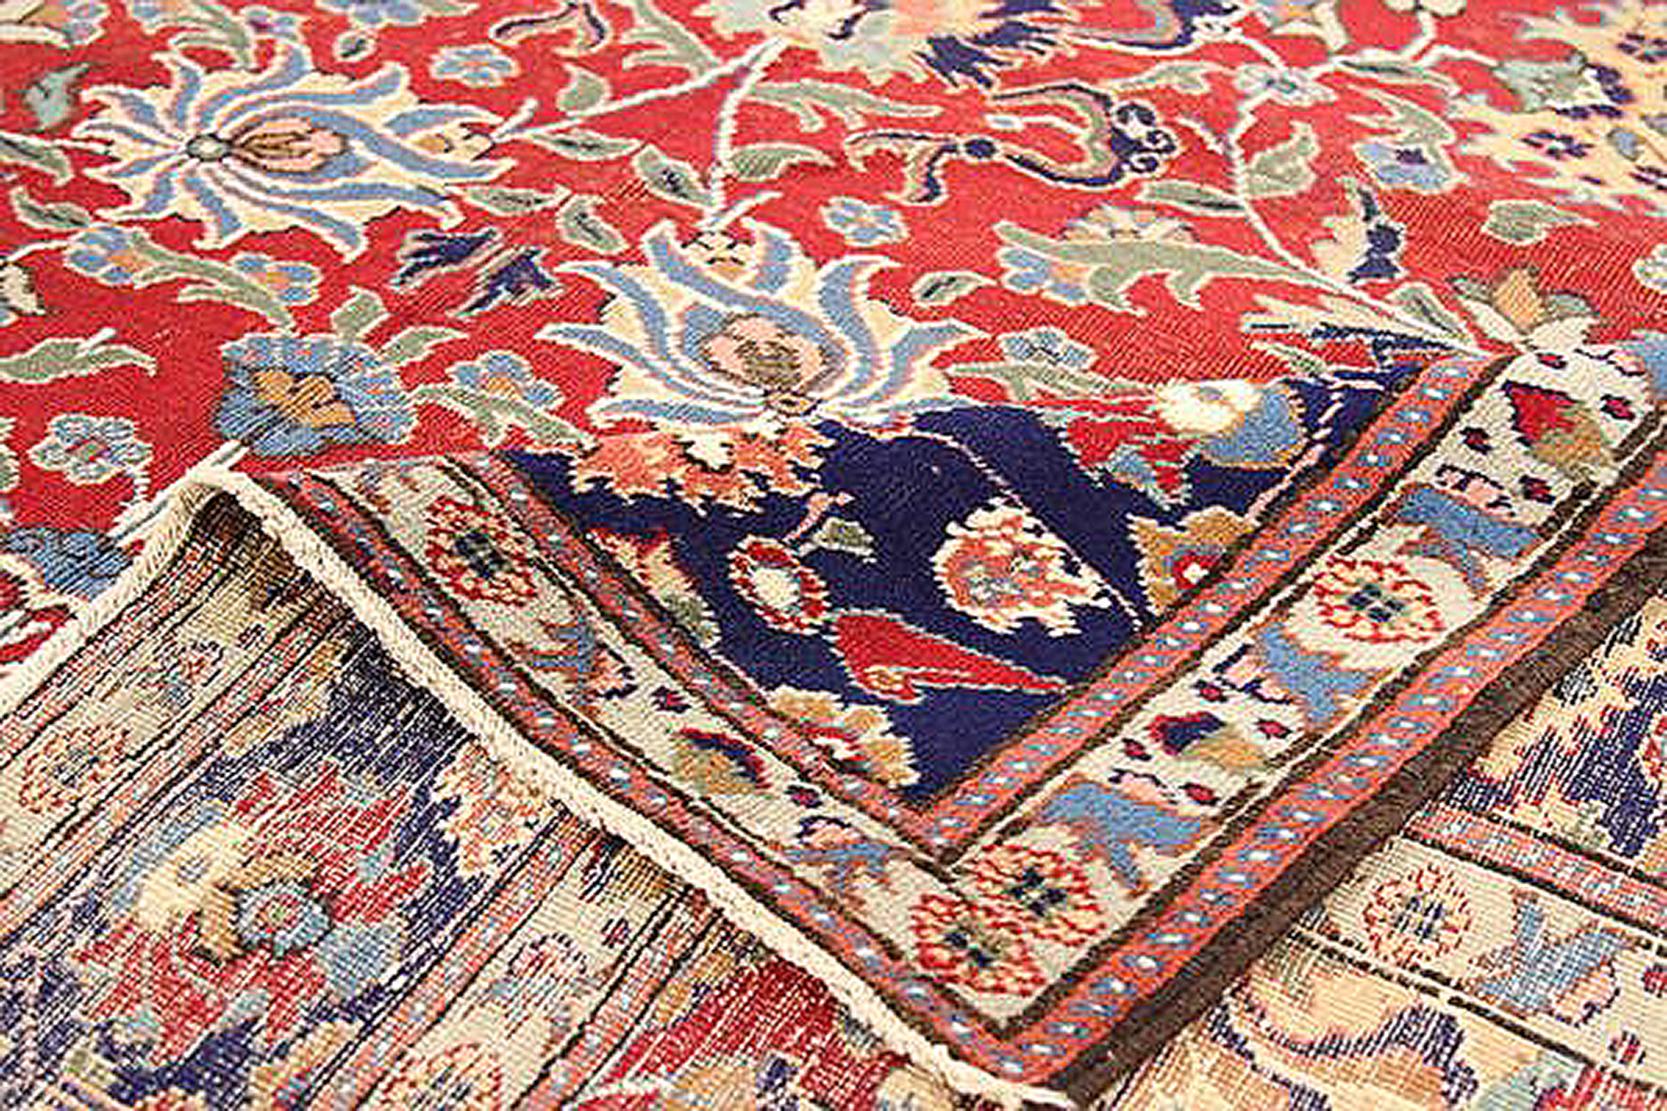 Antique Turkish rug handwoven from the finest sheep’s wool and colored with all-natural vegetable dyes that are safe for humans and pets. It’s a traditional Sivas design featuring all-over rows of floral details in beige, gray, and navy over a red